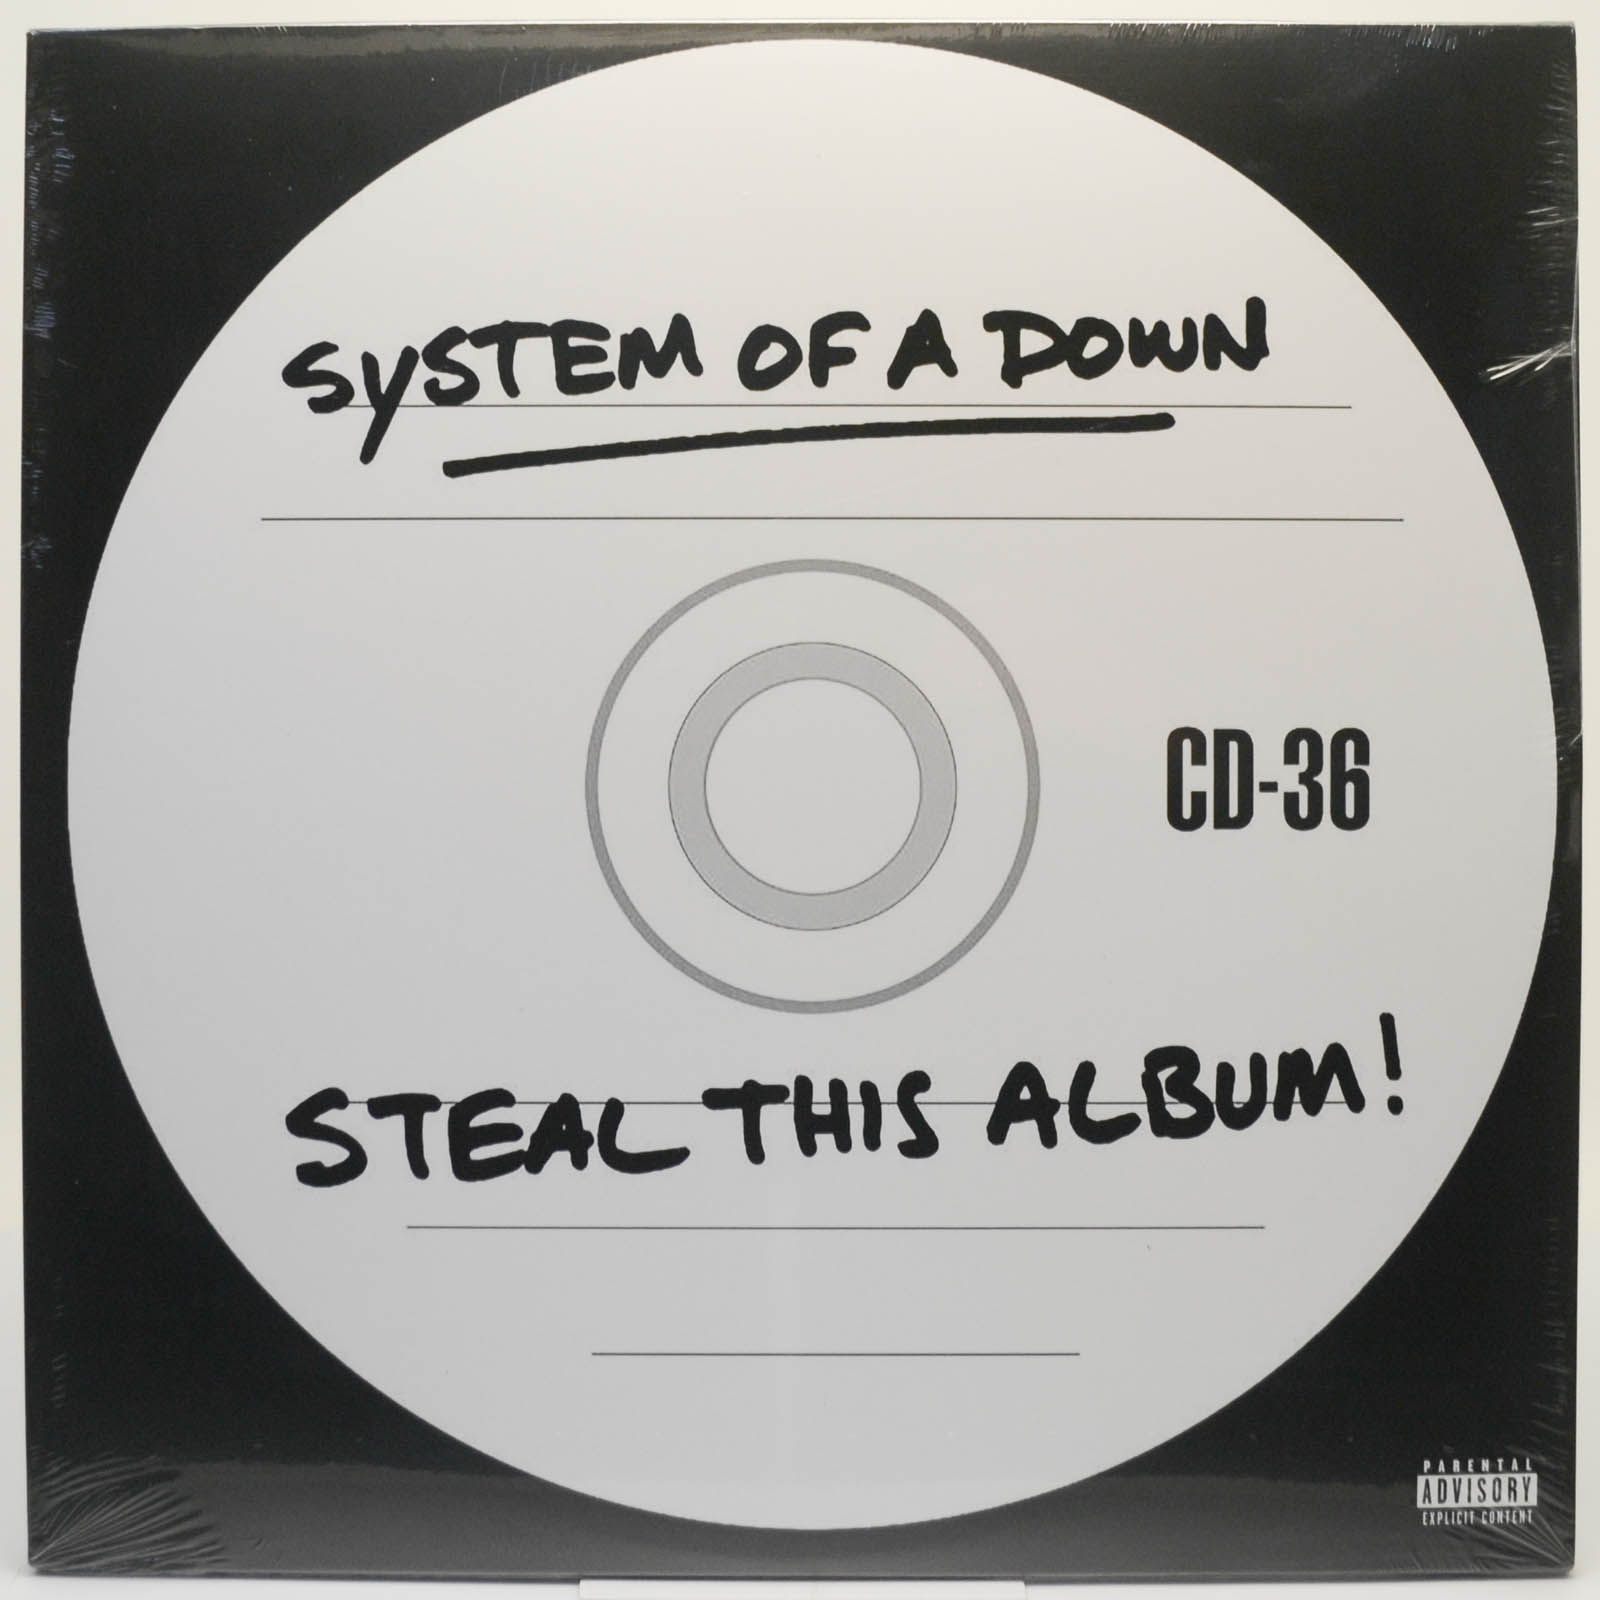 System Of A Down — Steal This Album! (2LP), 2002